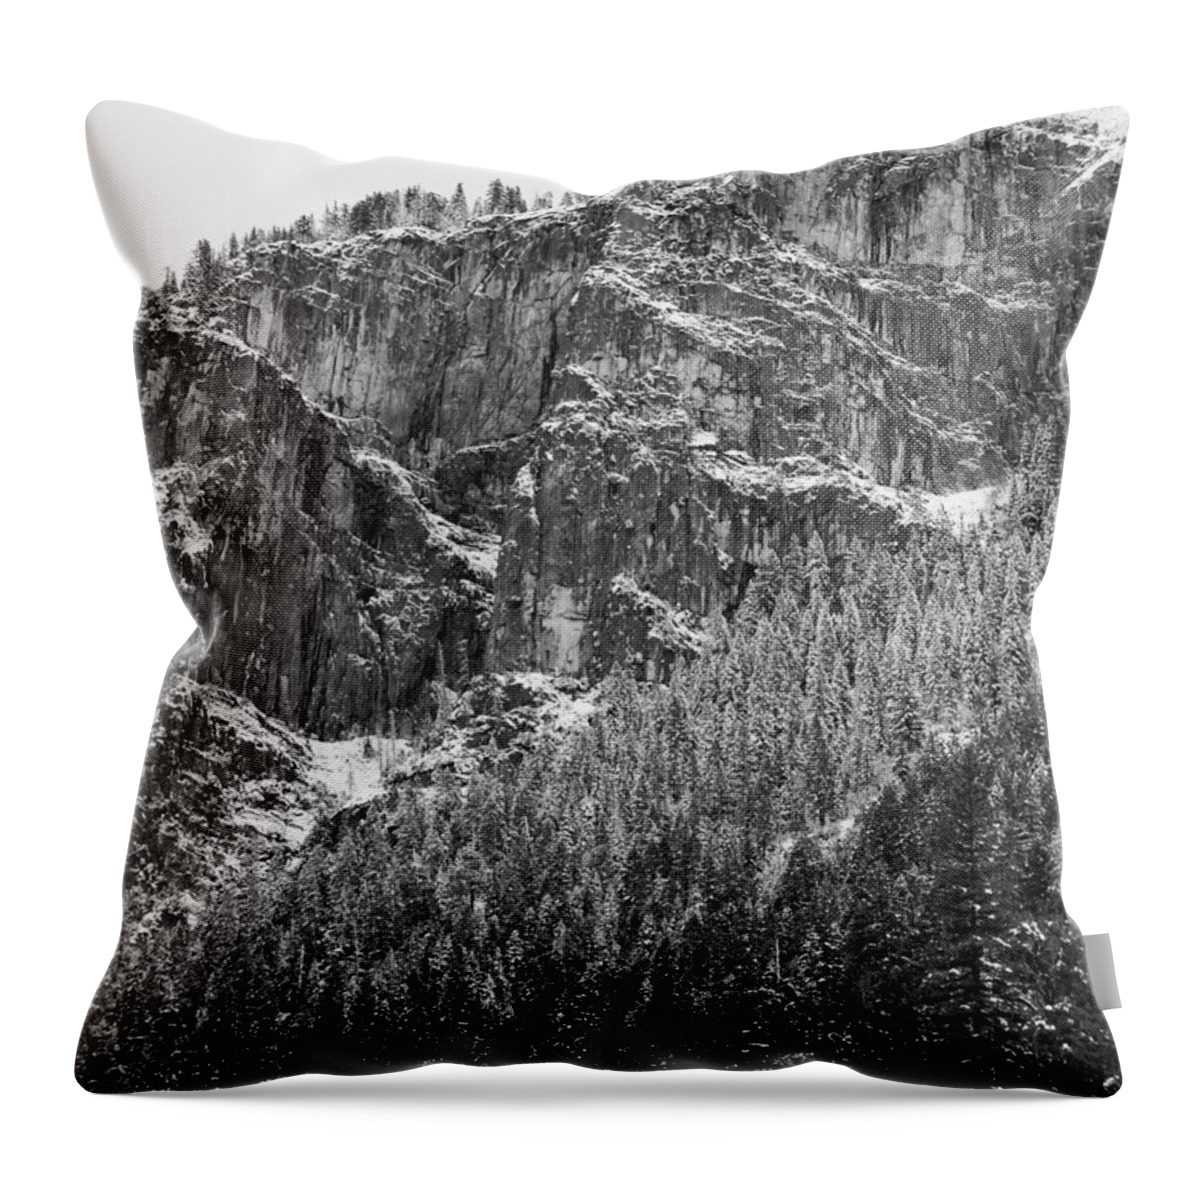 Yosemite Throw Pillow featuring the photograph Treefall by Lora Lee Chapman